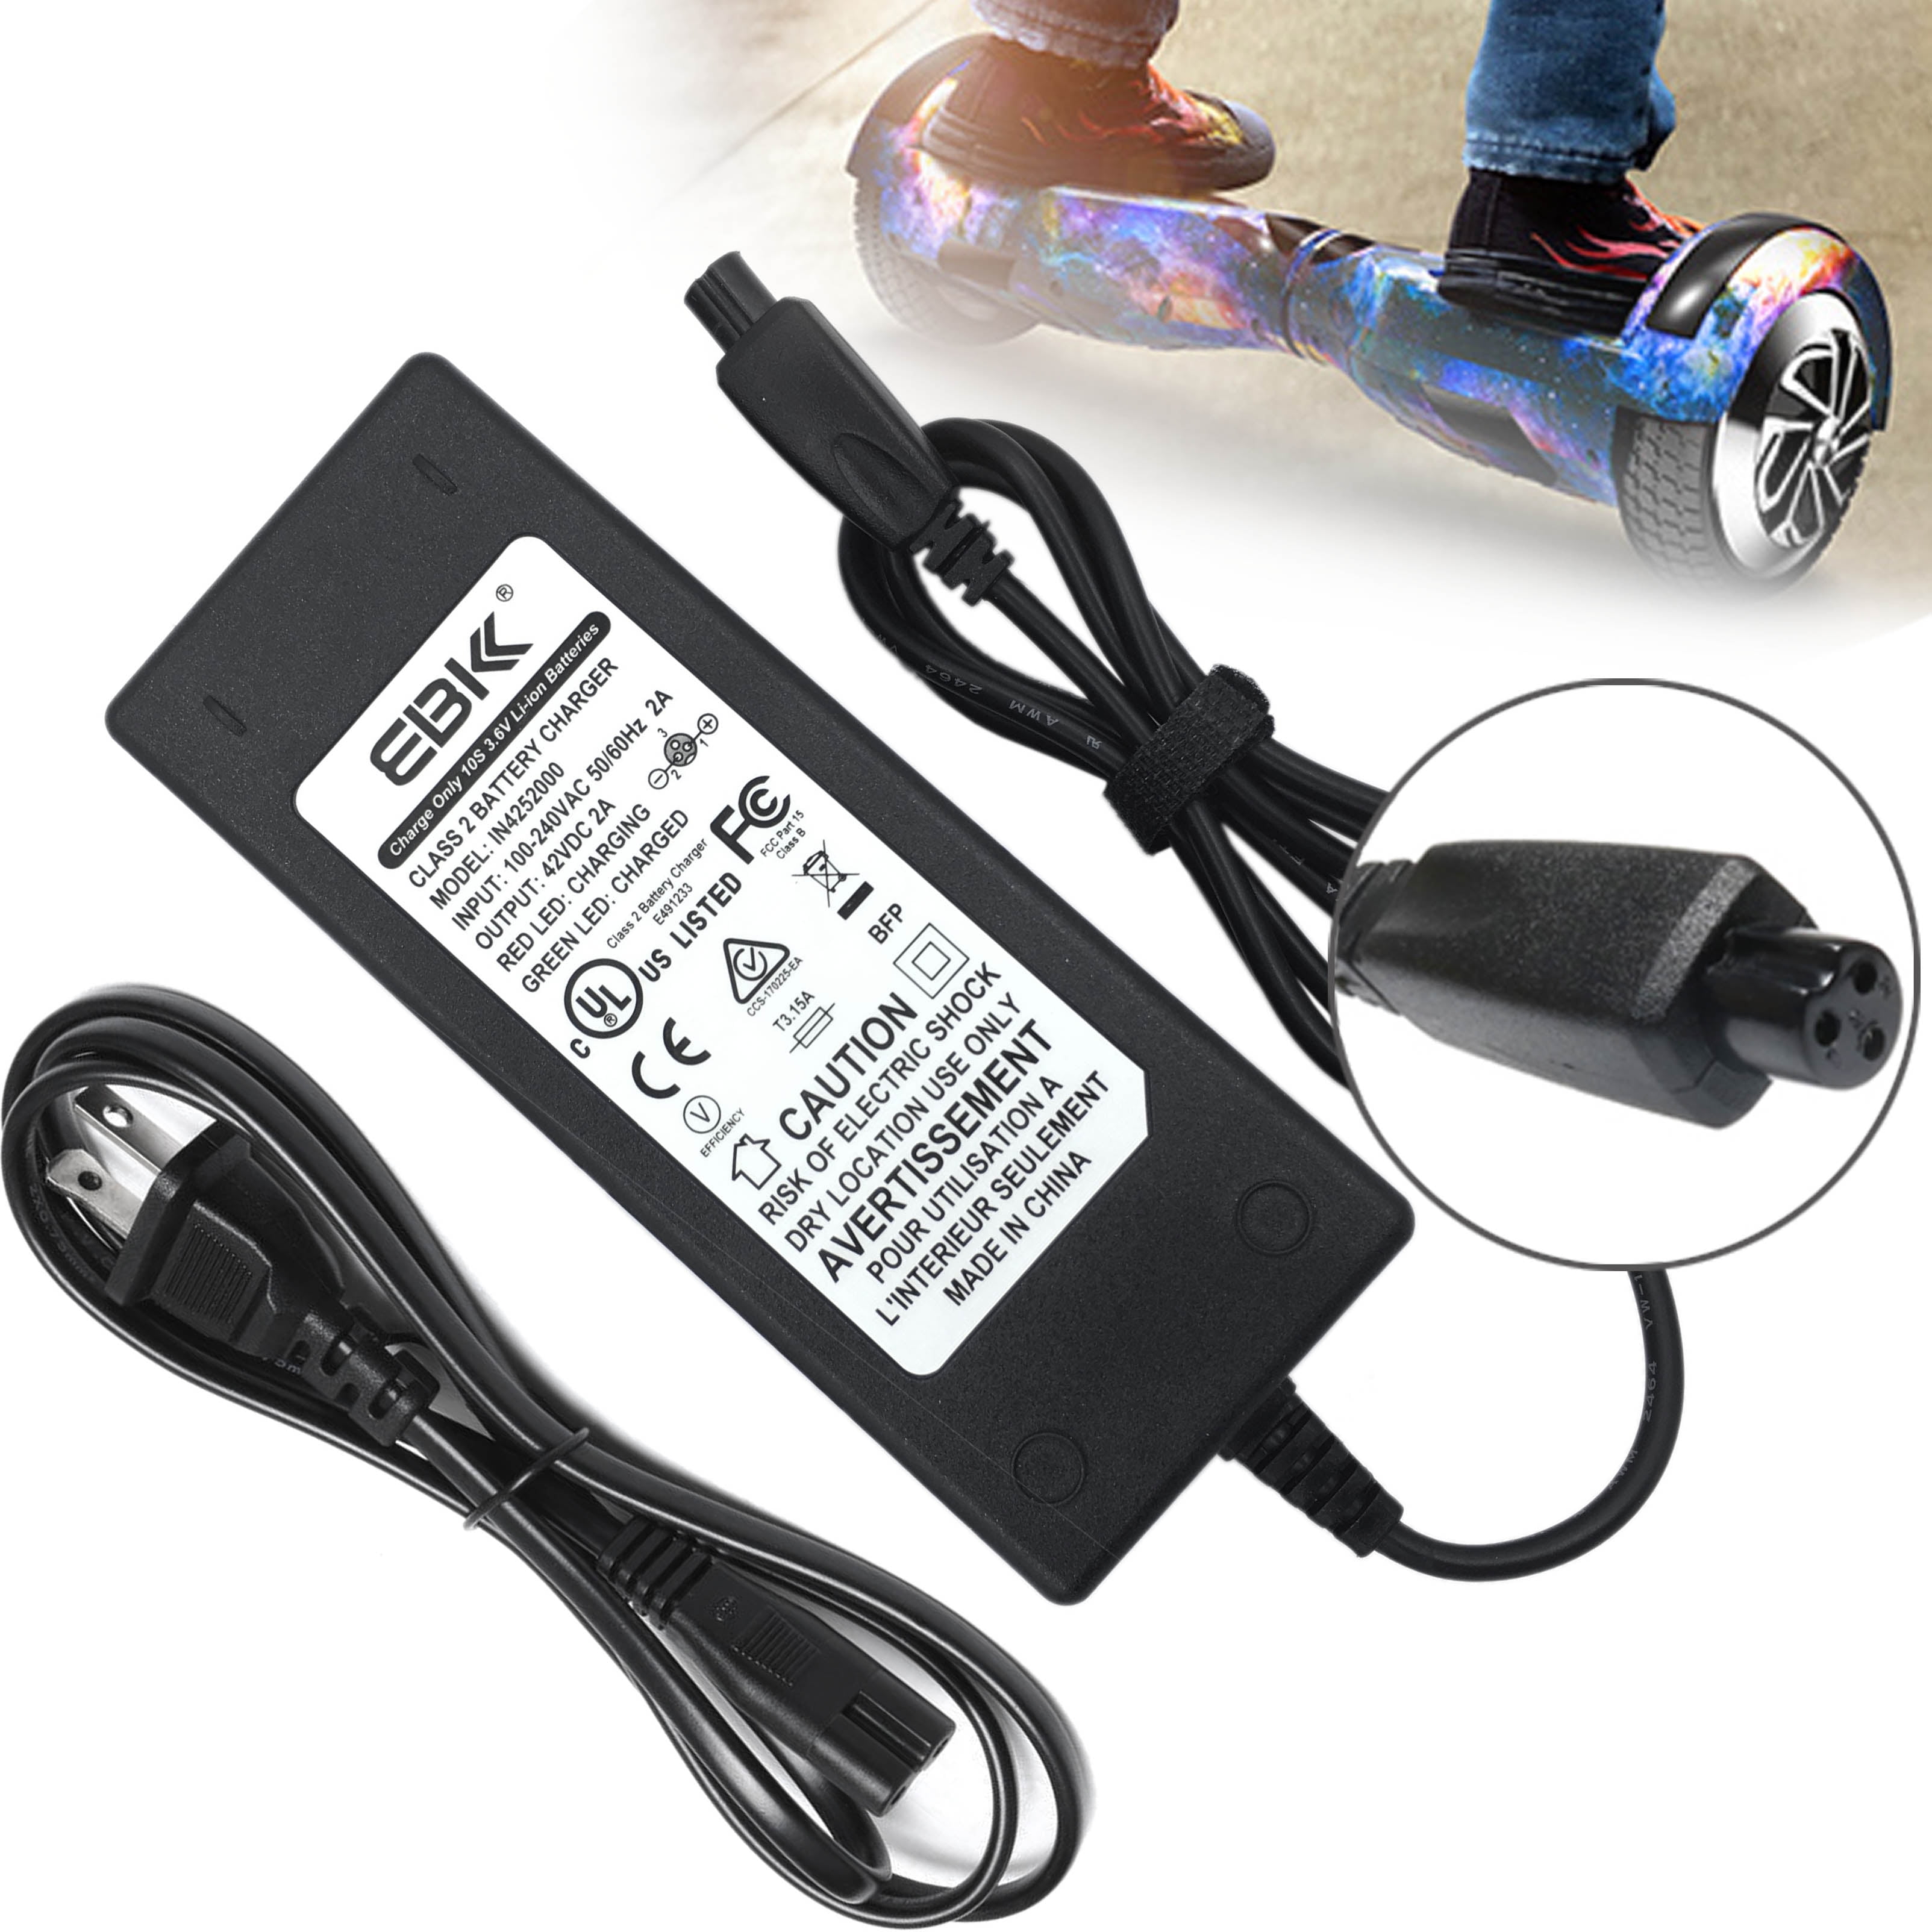 42V Power Adapter Battery Charger For 2 Wheel Smart Balance Scooter US/EU/UK 